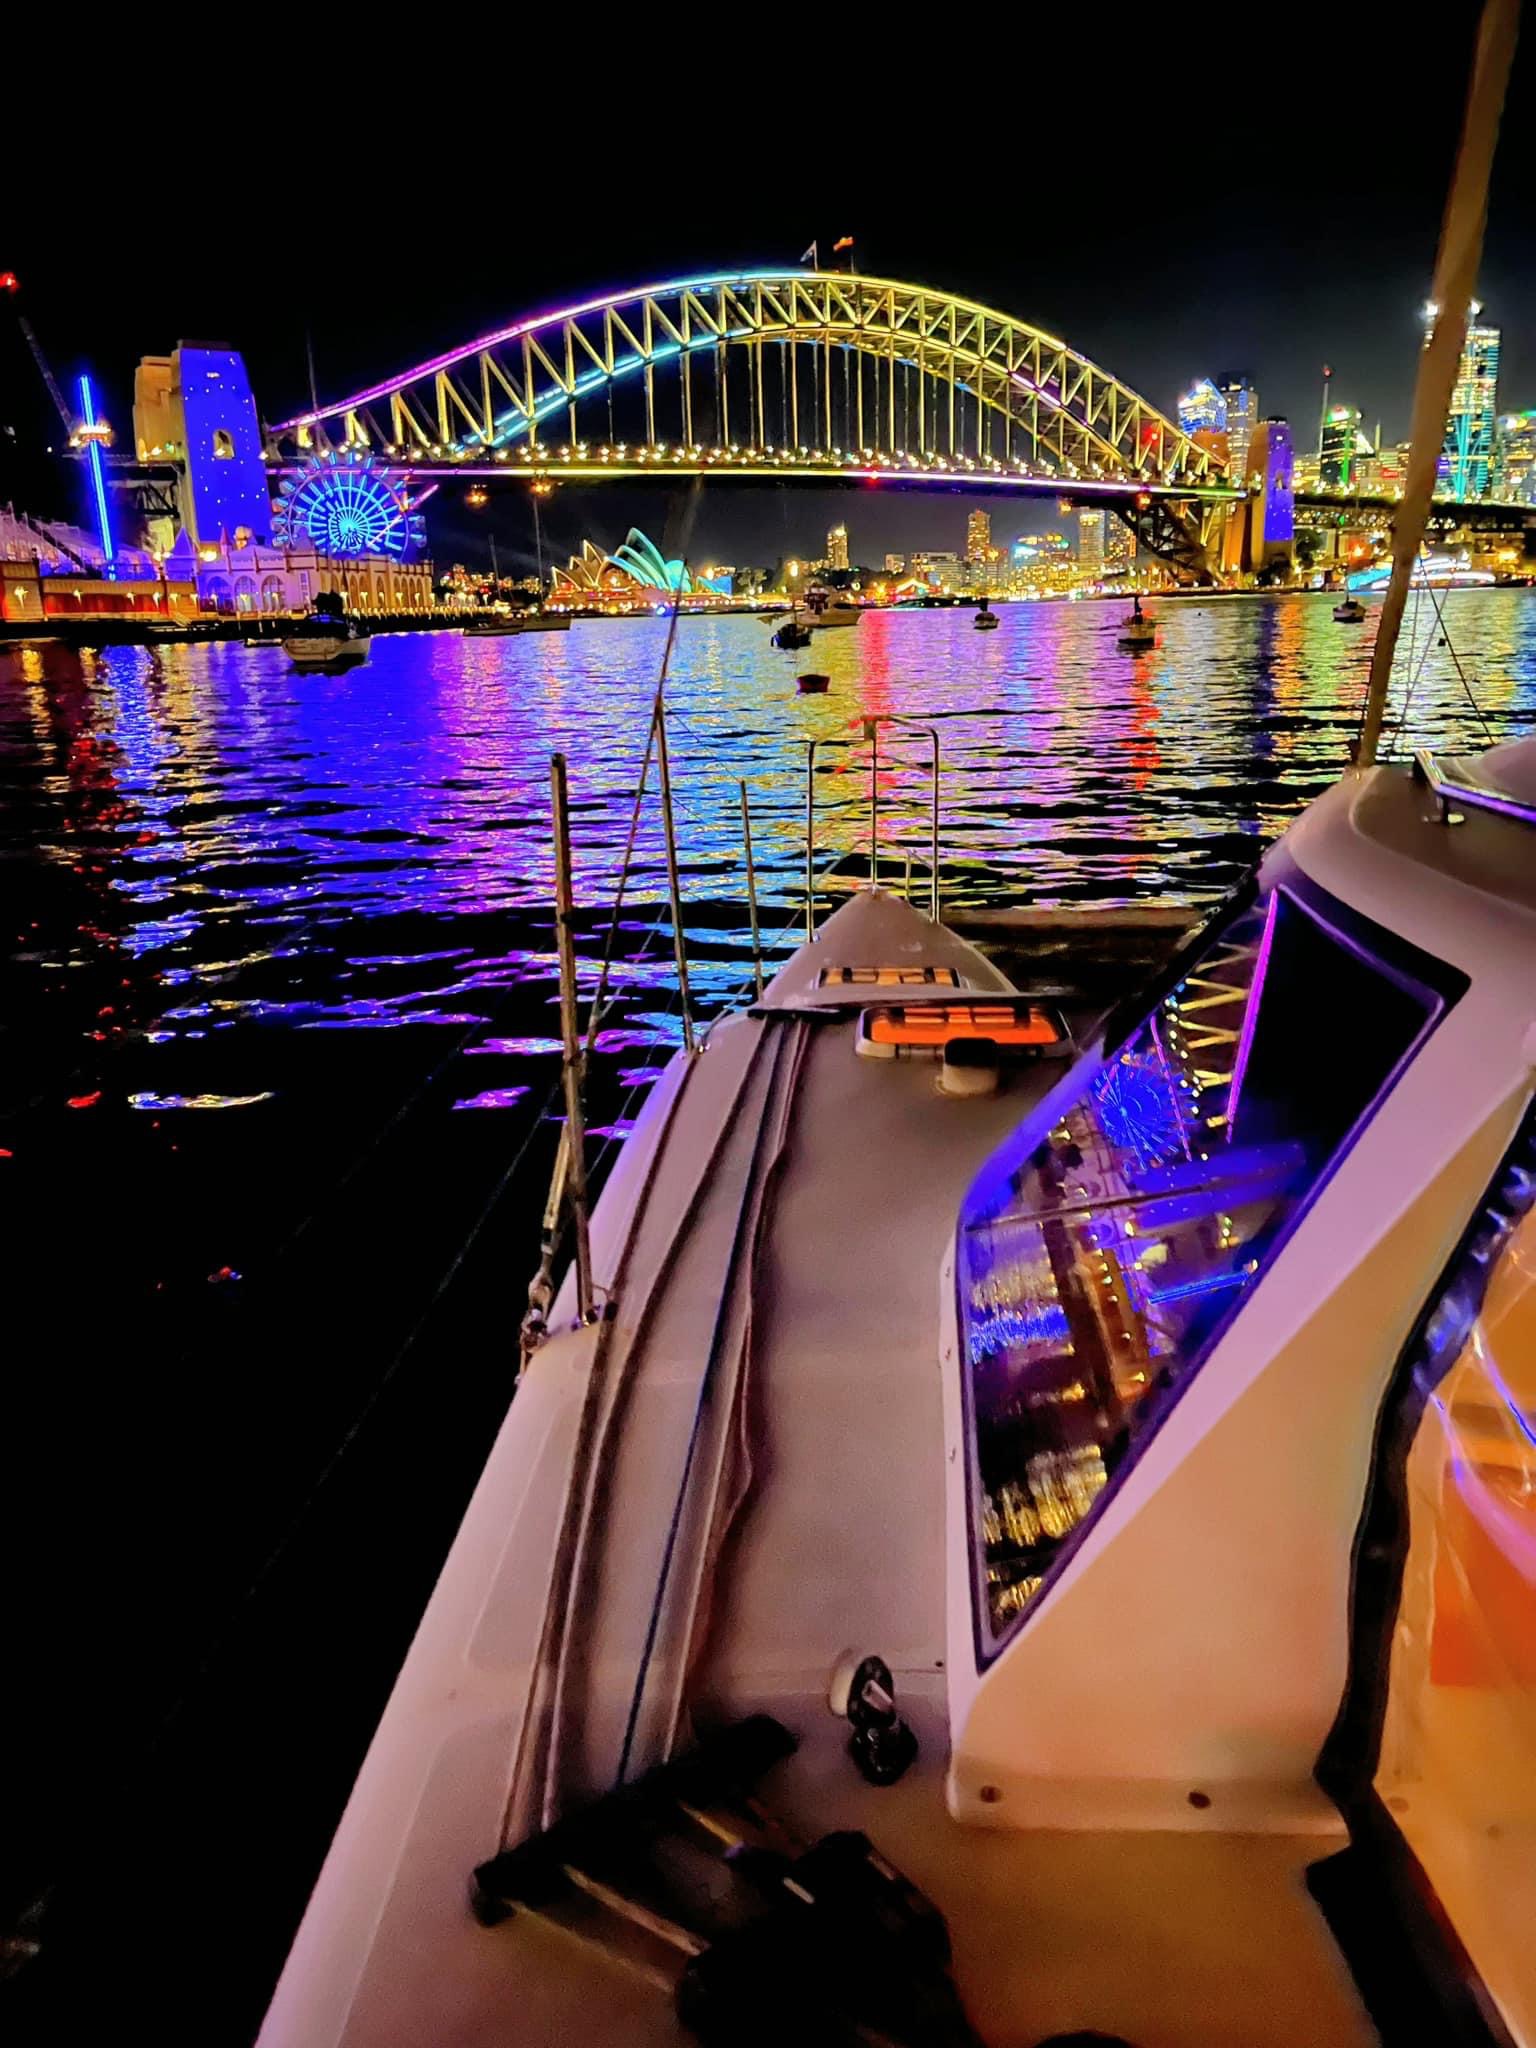 Mid-Week 4hr Vivid Sydney Harbour Cruise with complimentary cheese and chocolate platter